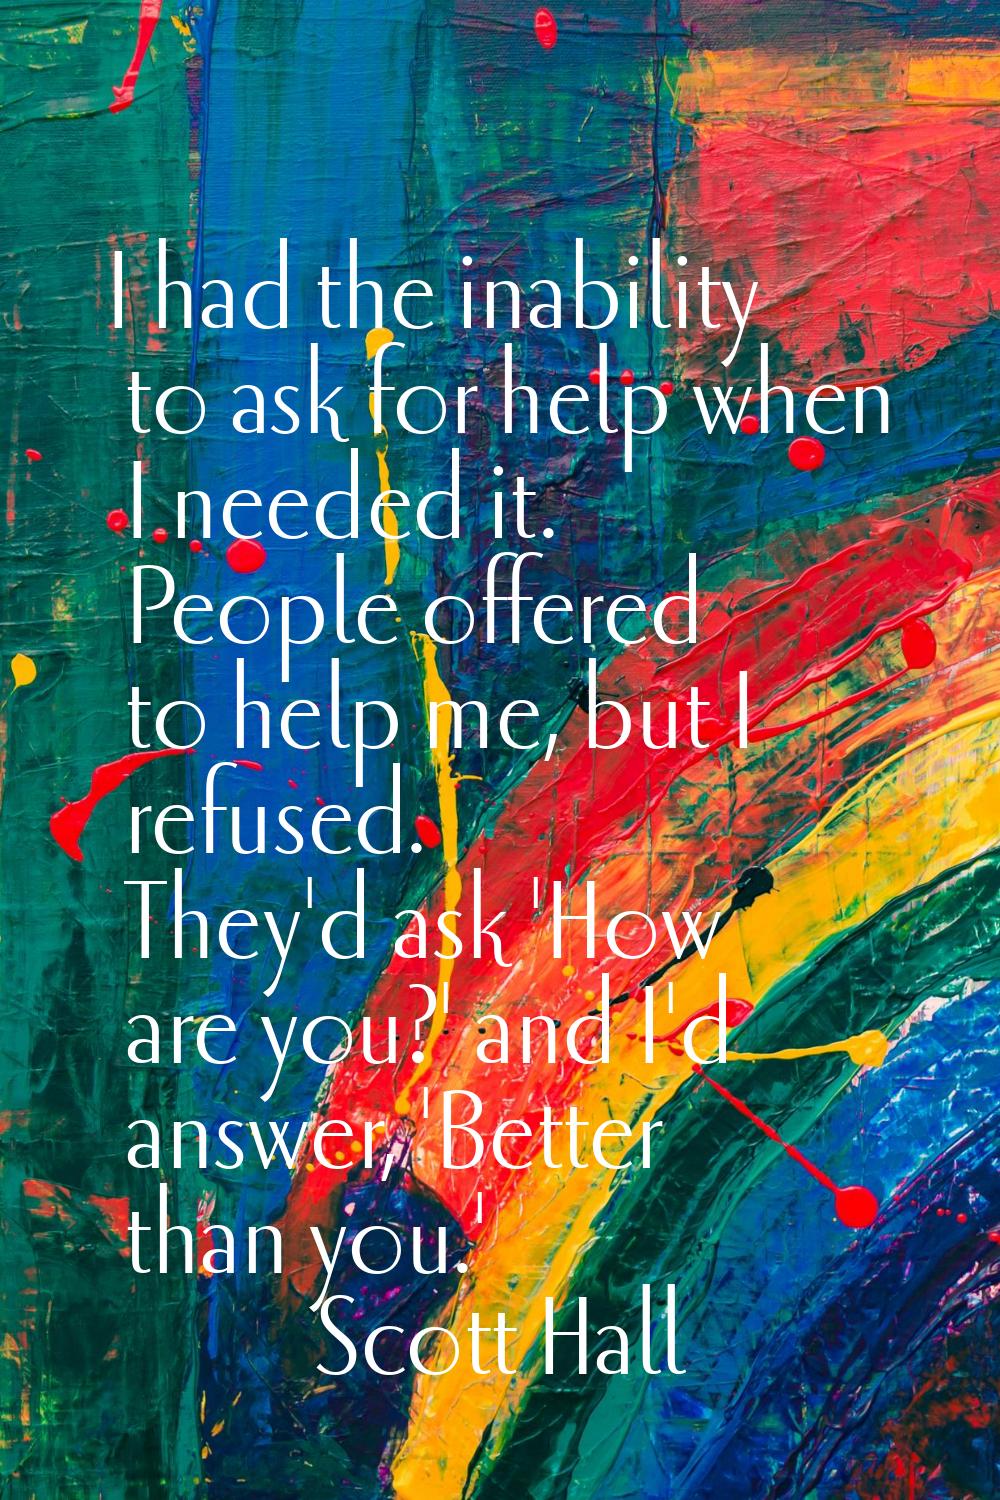 I had the inability to ask for help when I needed it. People offered to help me, but I refused. The